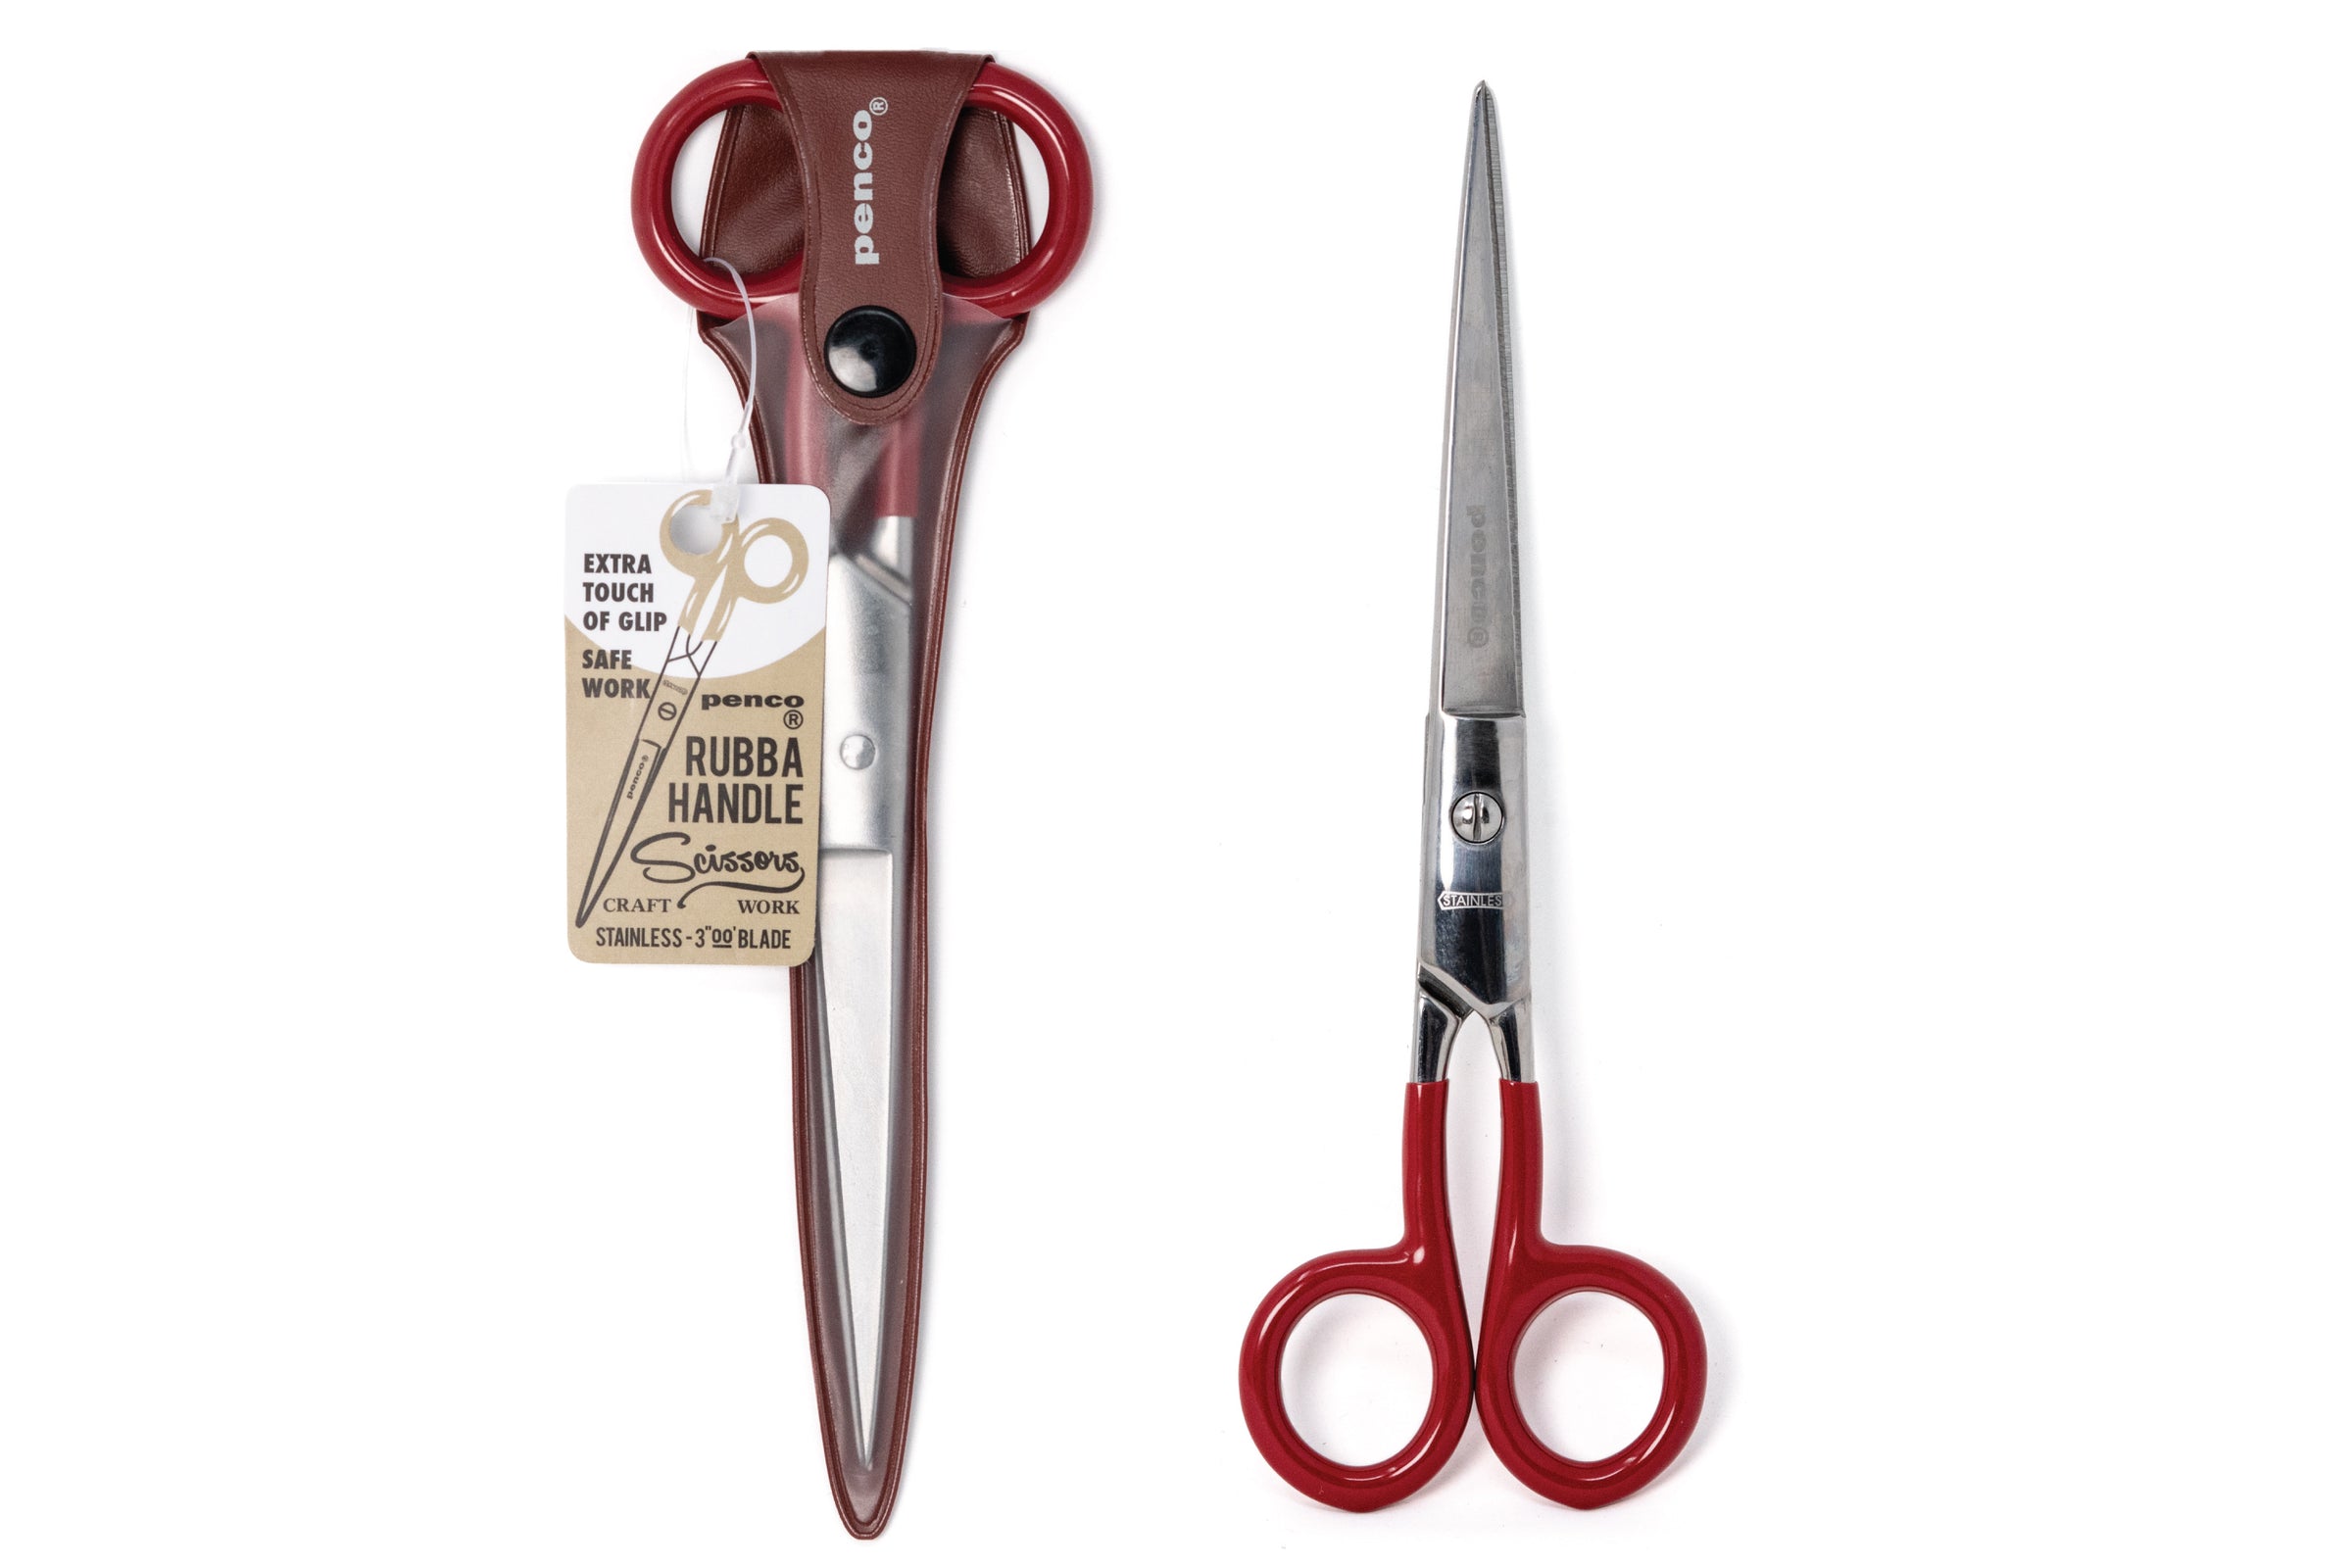 Looking at scissors. Recommendations? : r/Tools